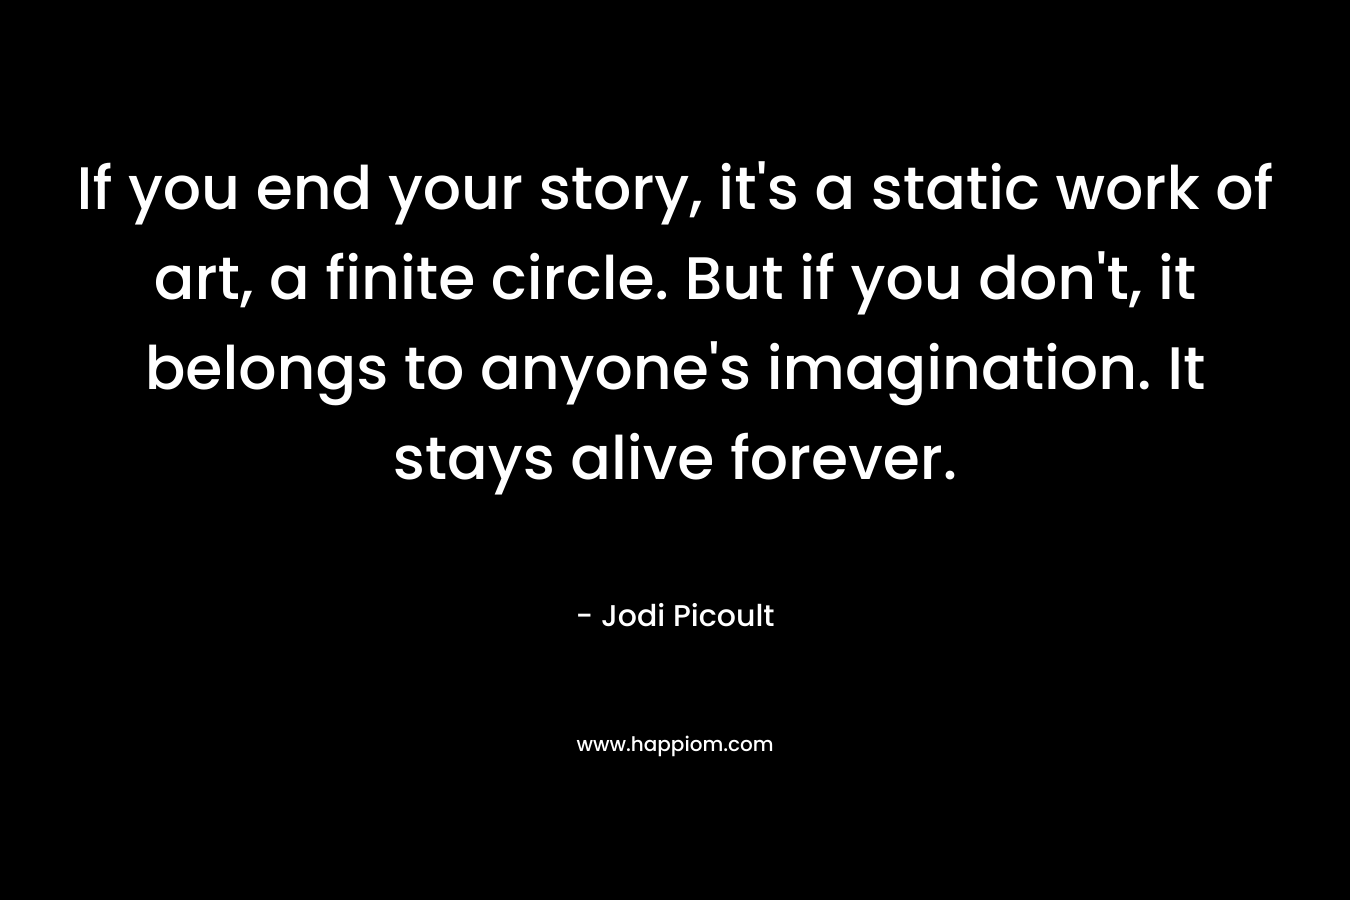 If you end your story, it’s a static work of art, a finite circle. But if you don’t, it belongs to anyone’s imagination. It stays alive forever. – Jodi Picoult